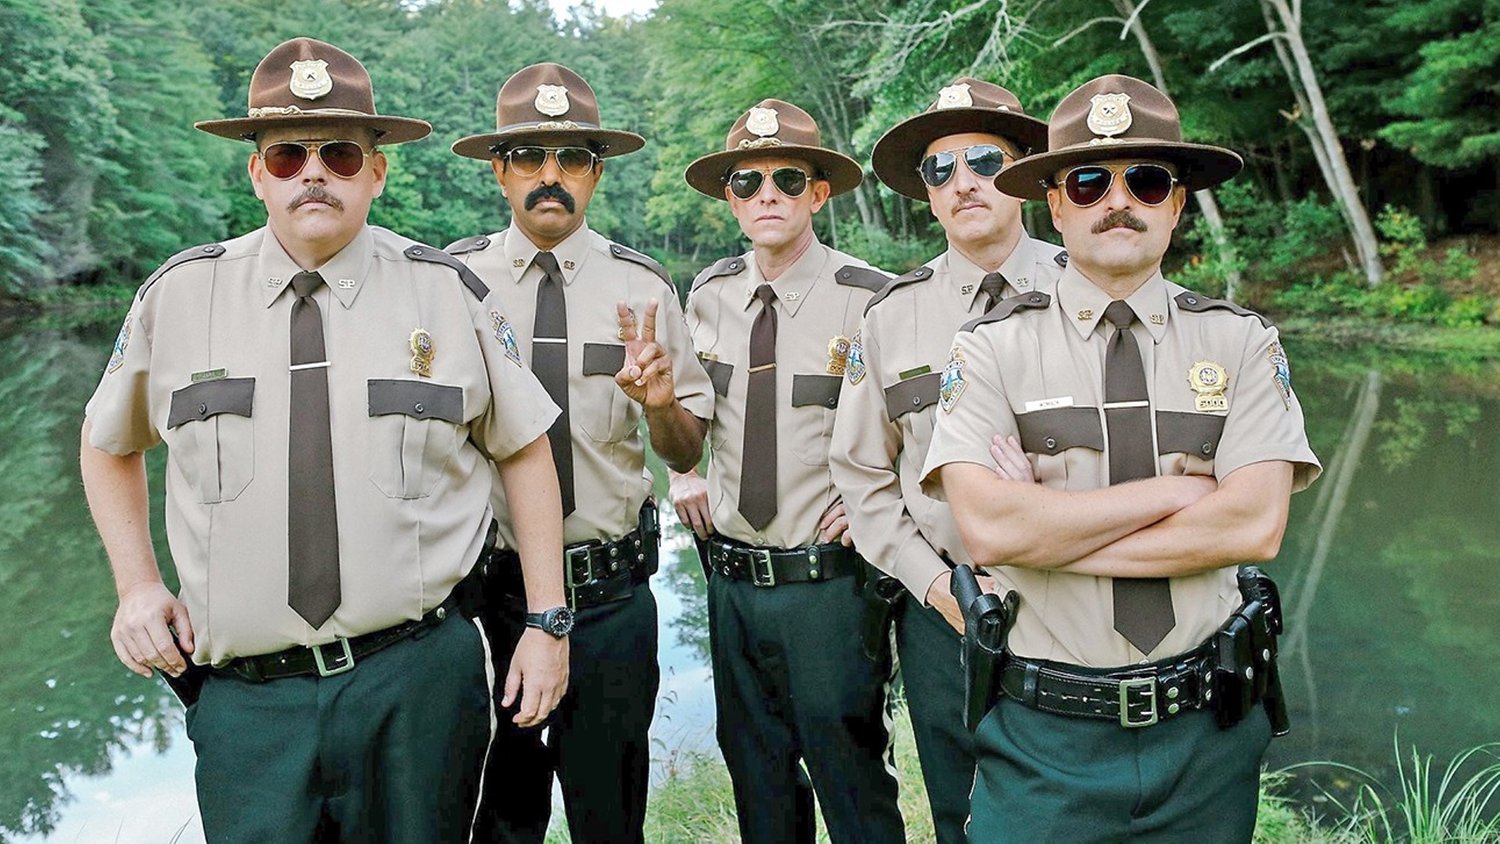 The SUPER TROOPERS Team Is Making a HUNCHBACK OF NOTRE DAME Satire Film QUA...